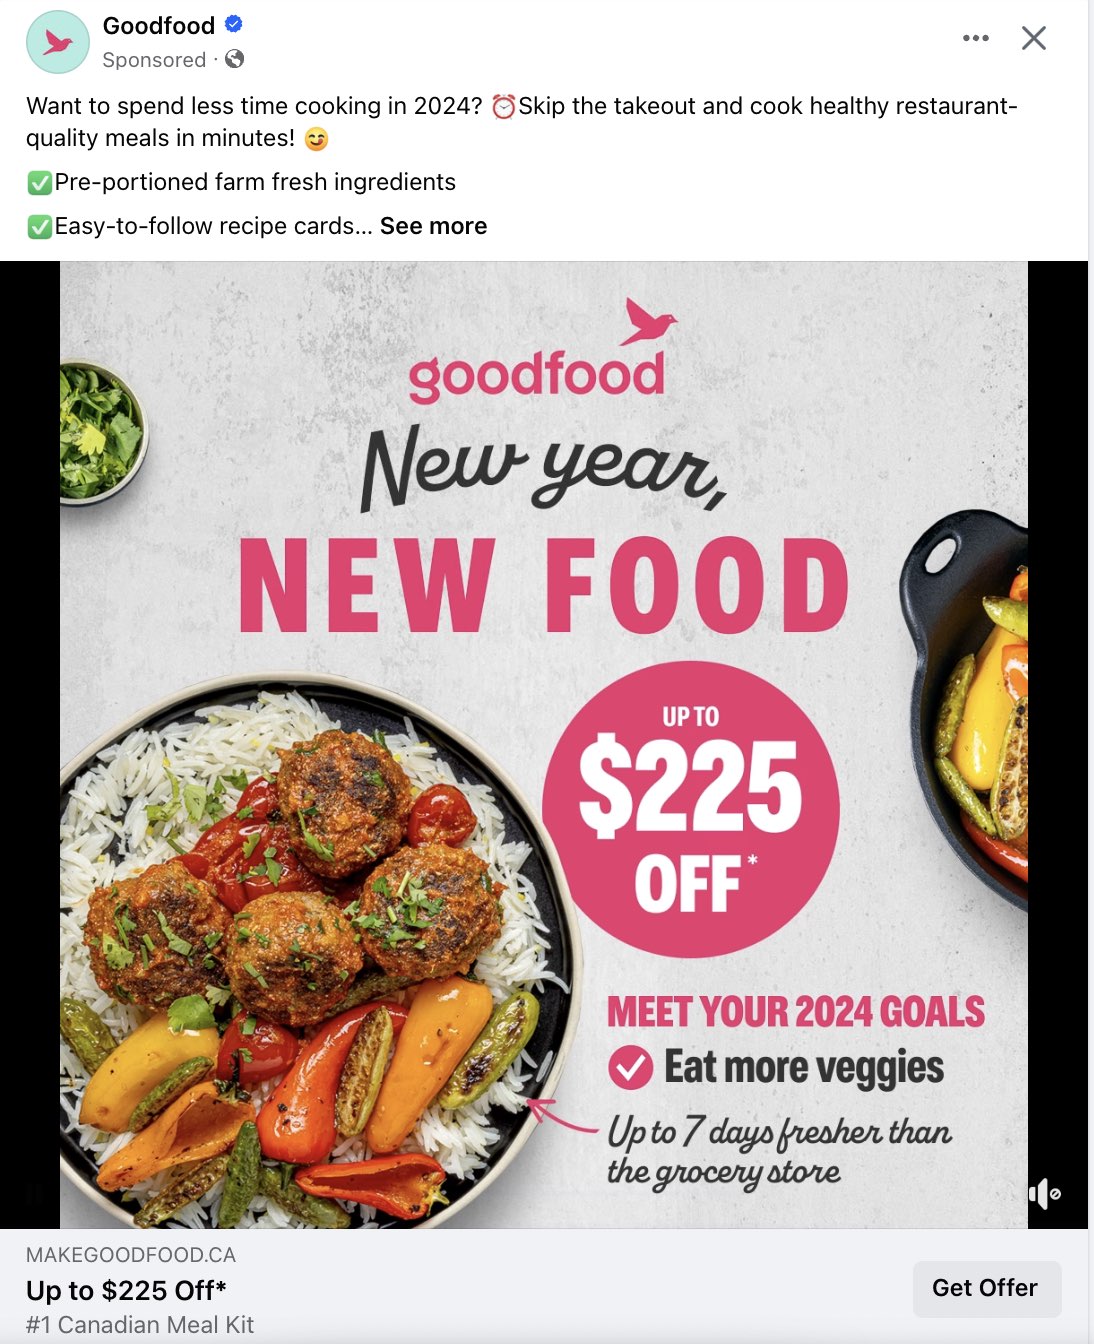 Facebook video ad from Goodfood, showing the food plates and a discount of up to $225 off